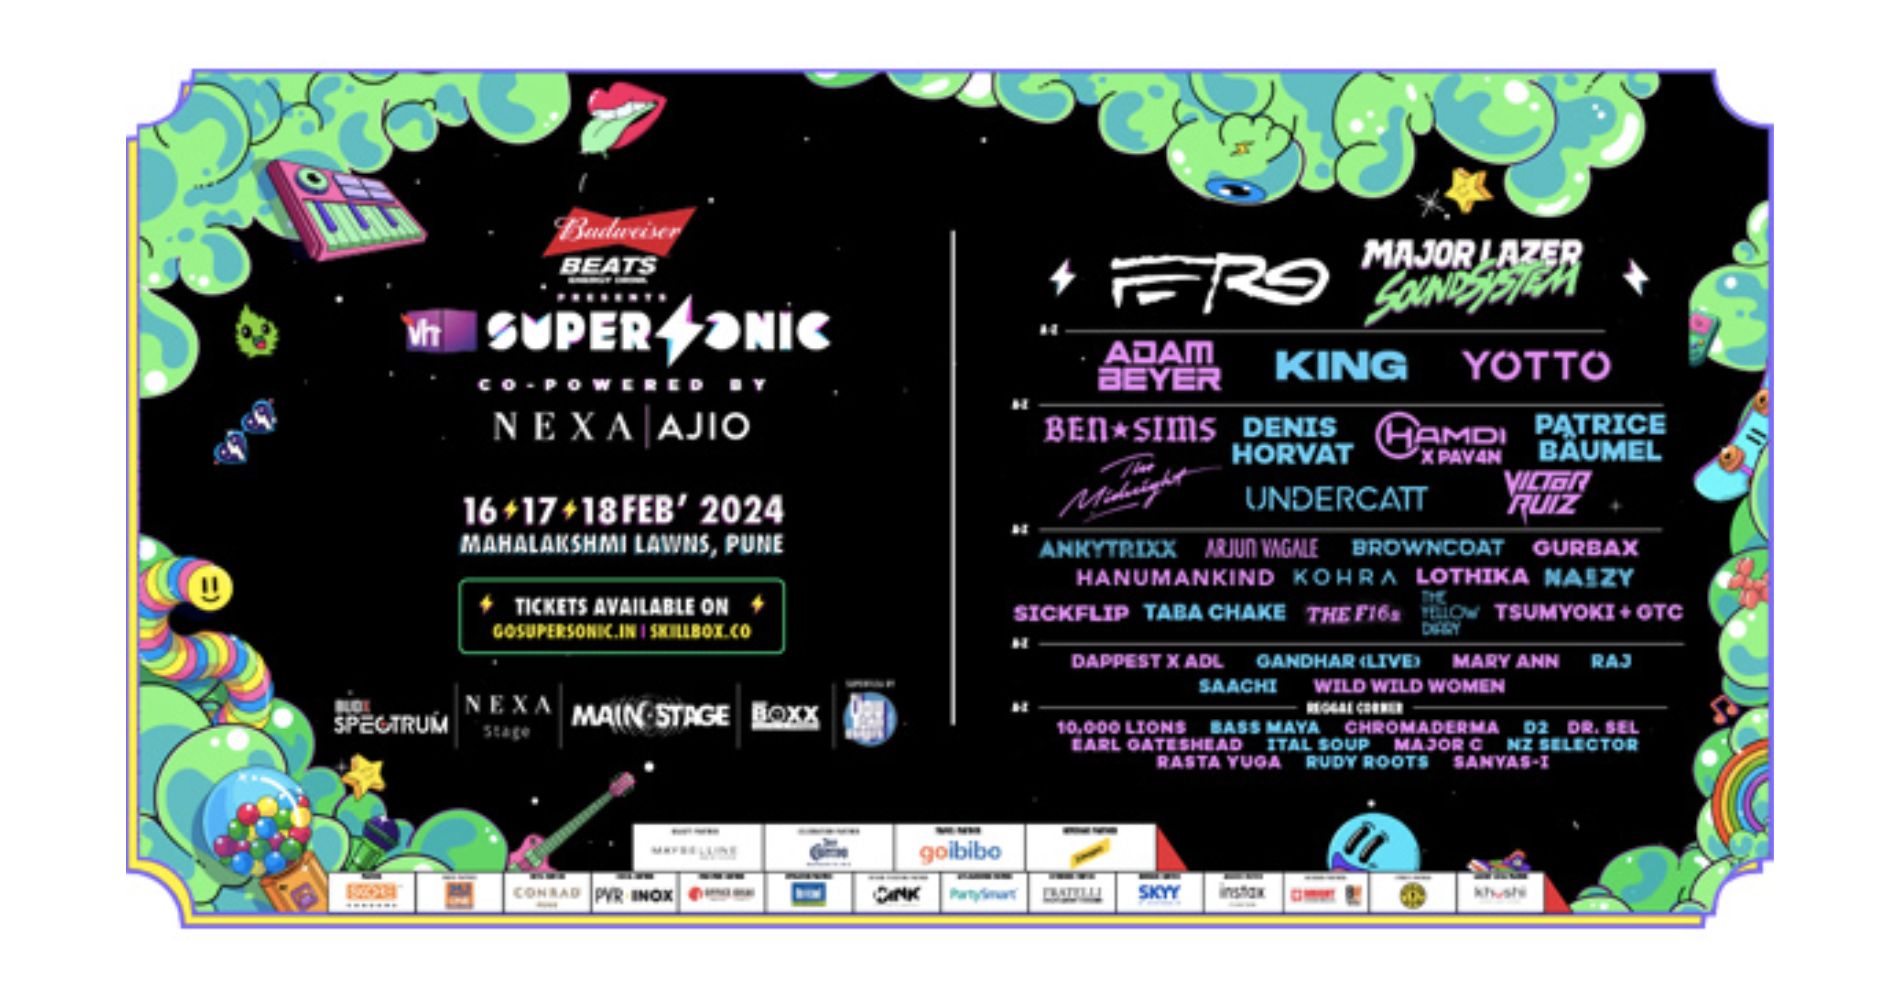 Vh1 Supersonic 2024 Introduces Stellar Lineup Of Debuting Artists To